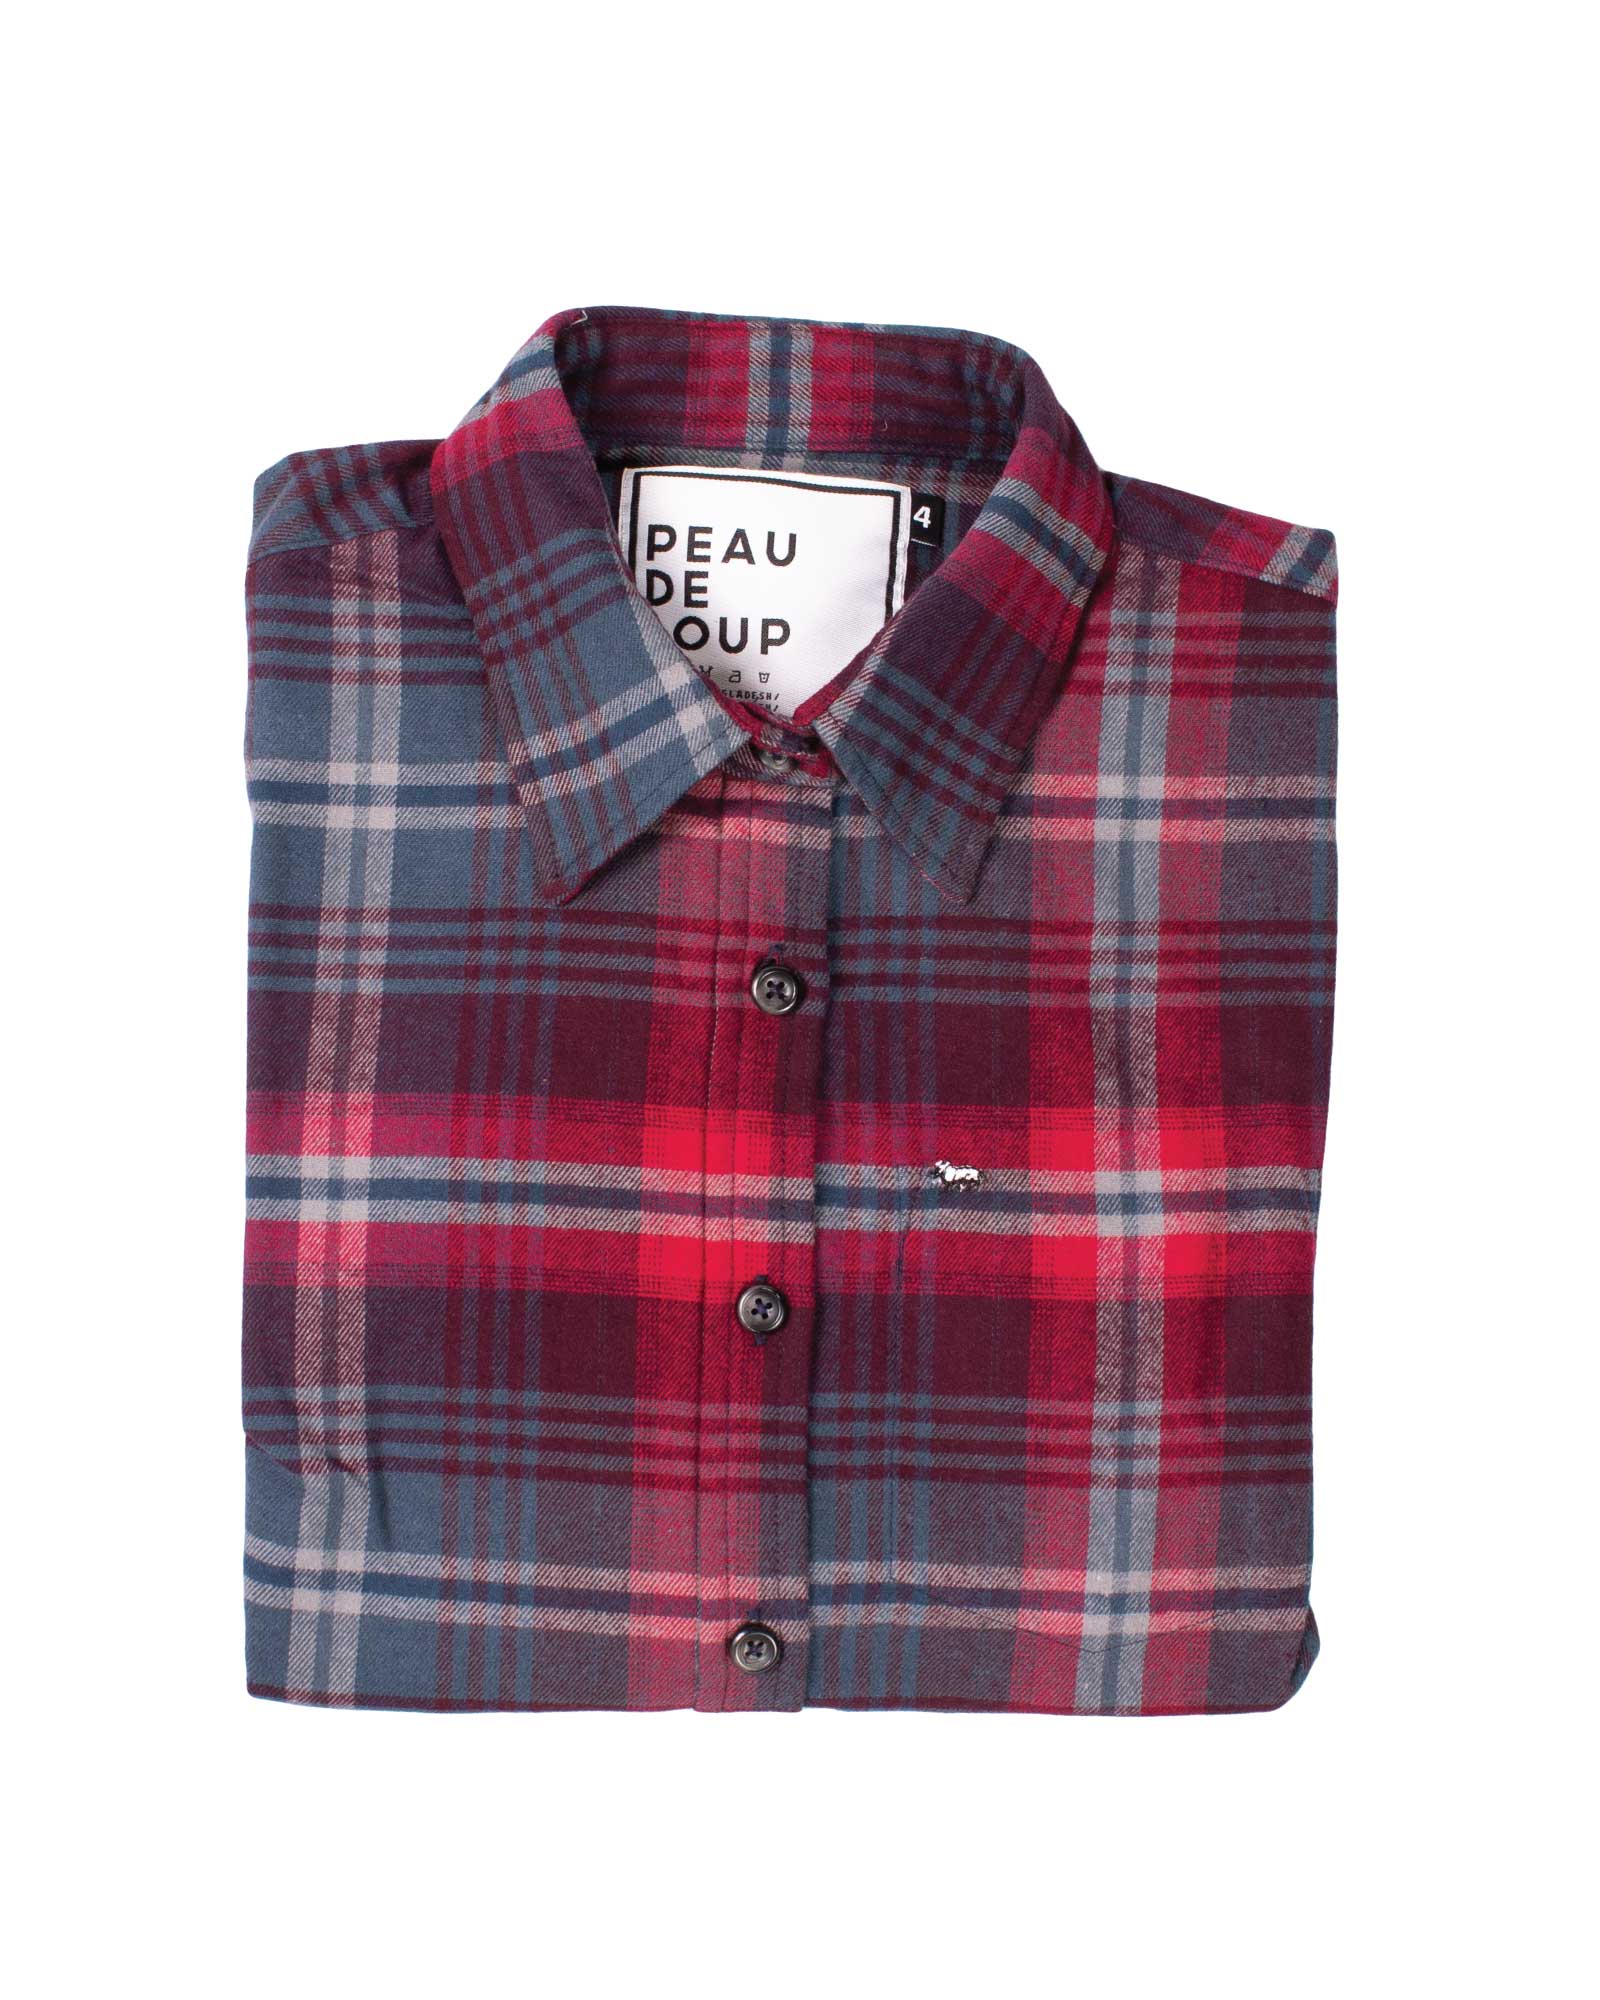 Lagoon and Berry Plaid Flannel